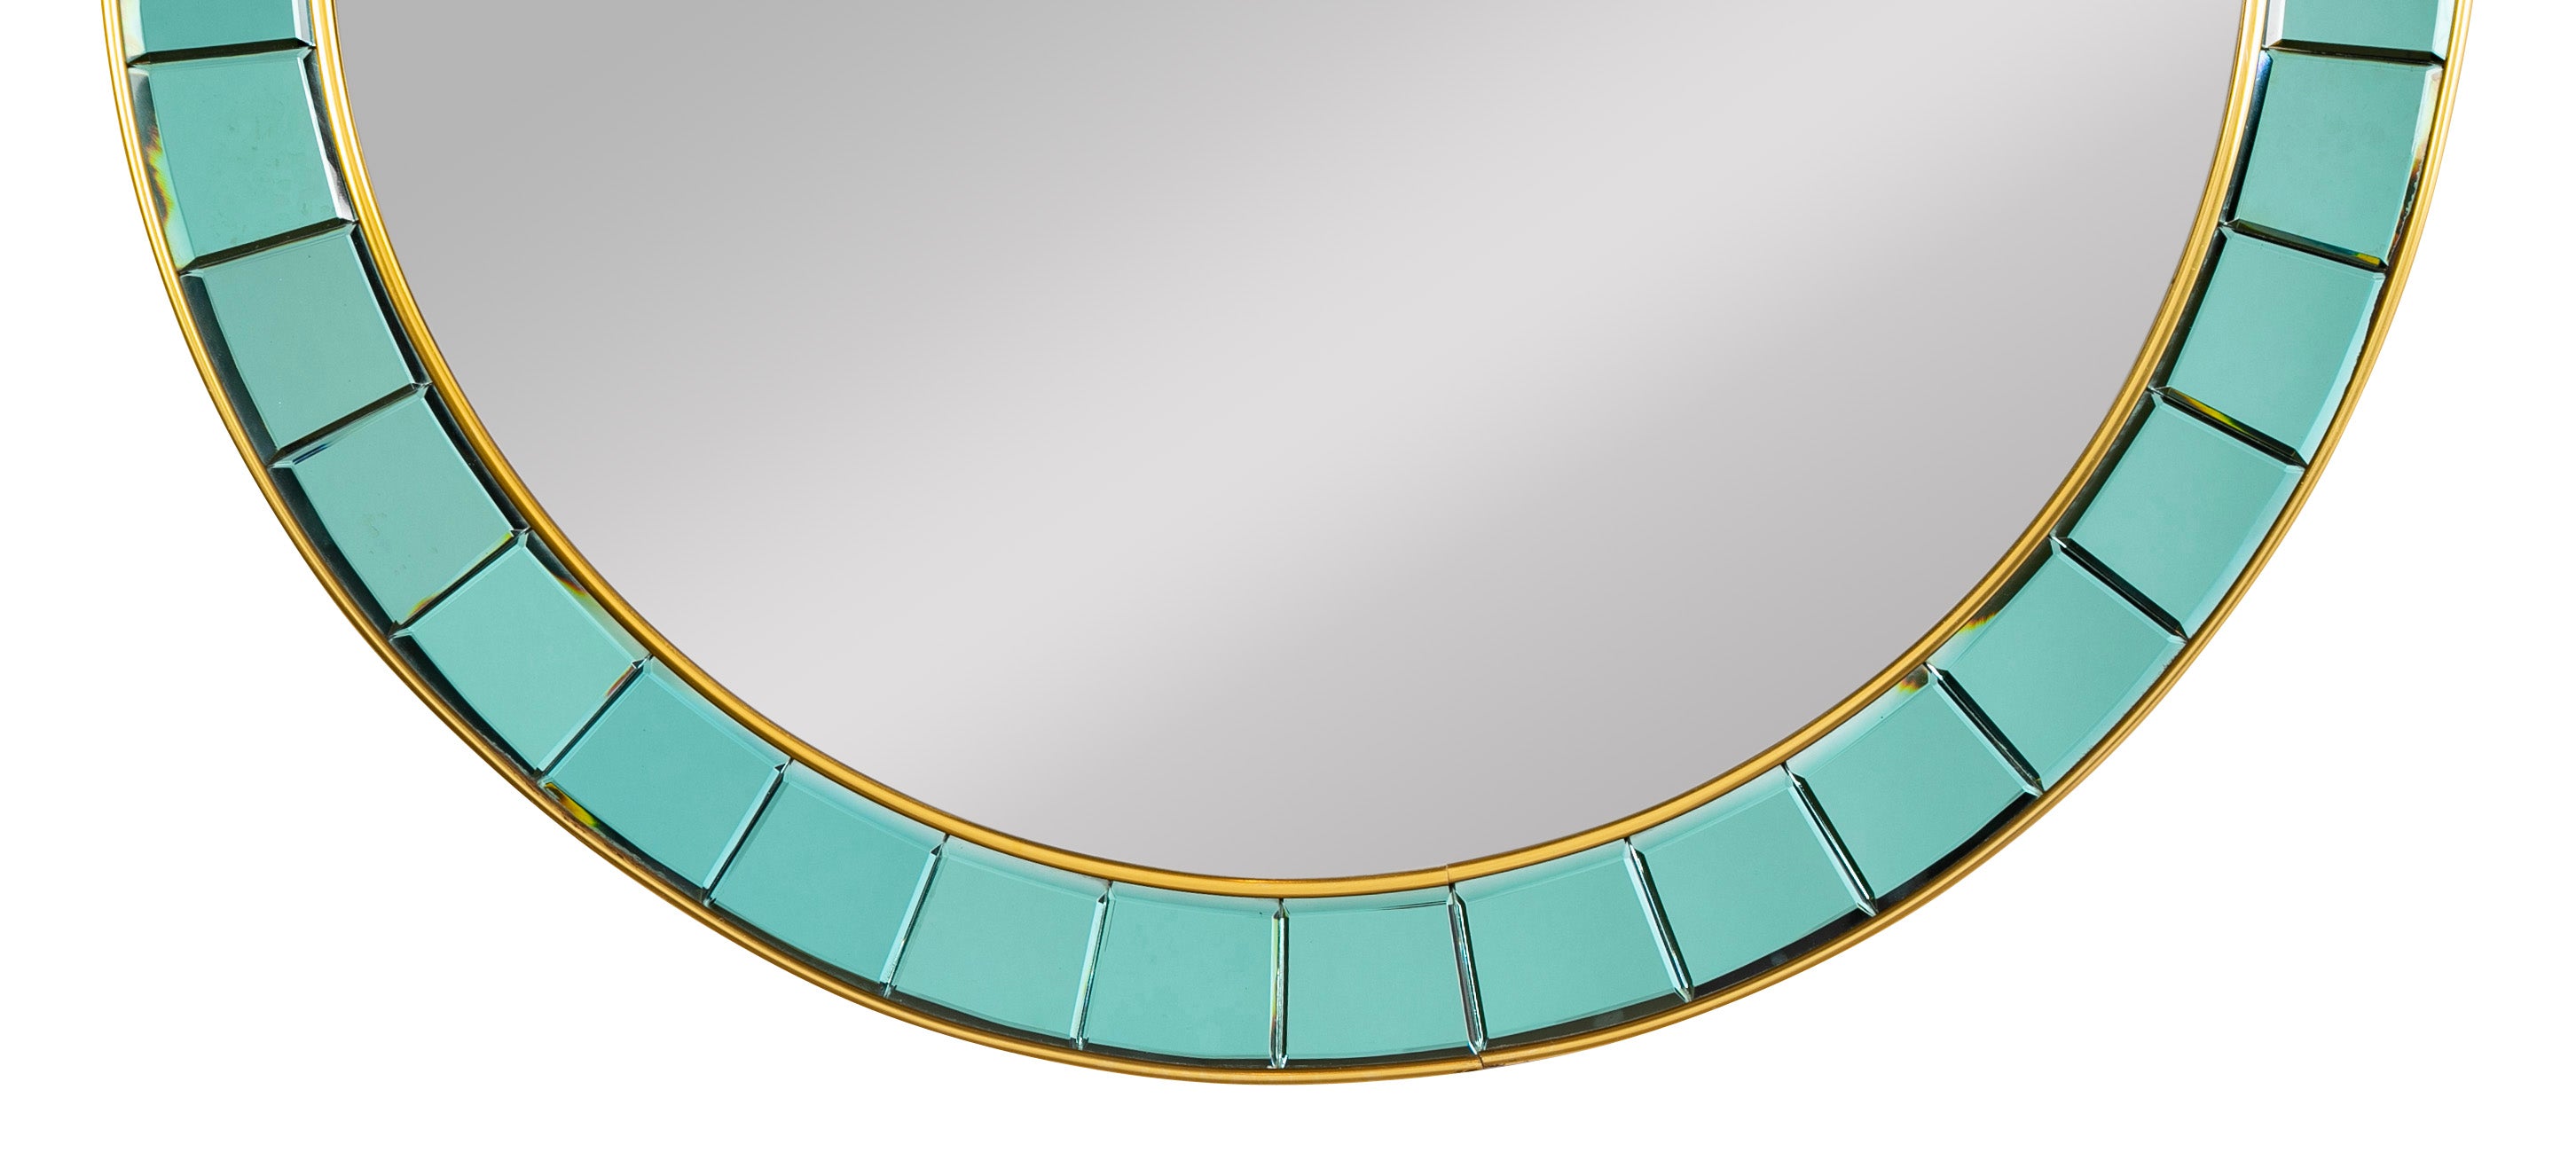 Italian Cristal Arte Round Mirror with Colored Glass and Brass Edges